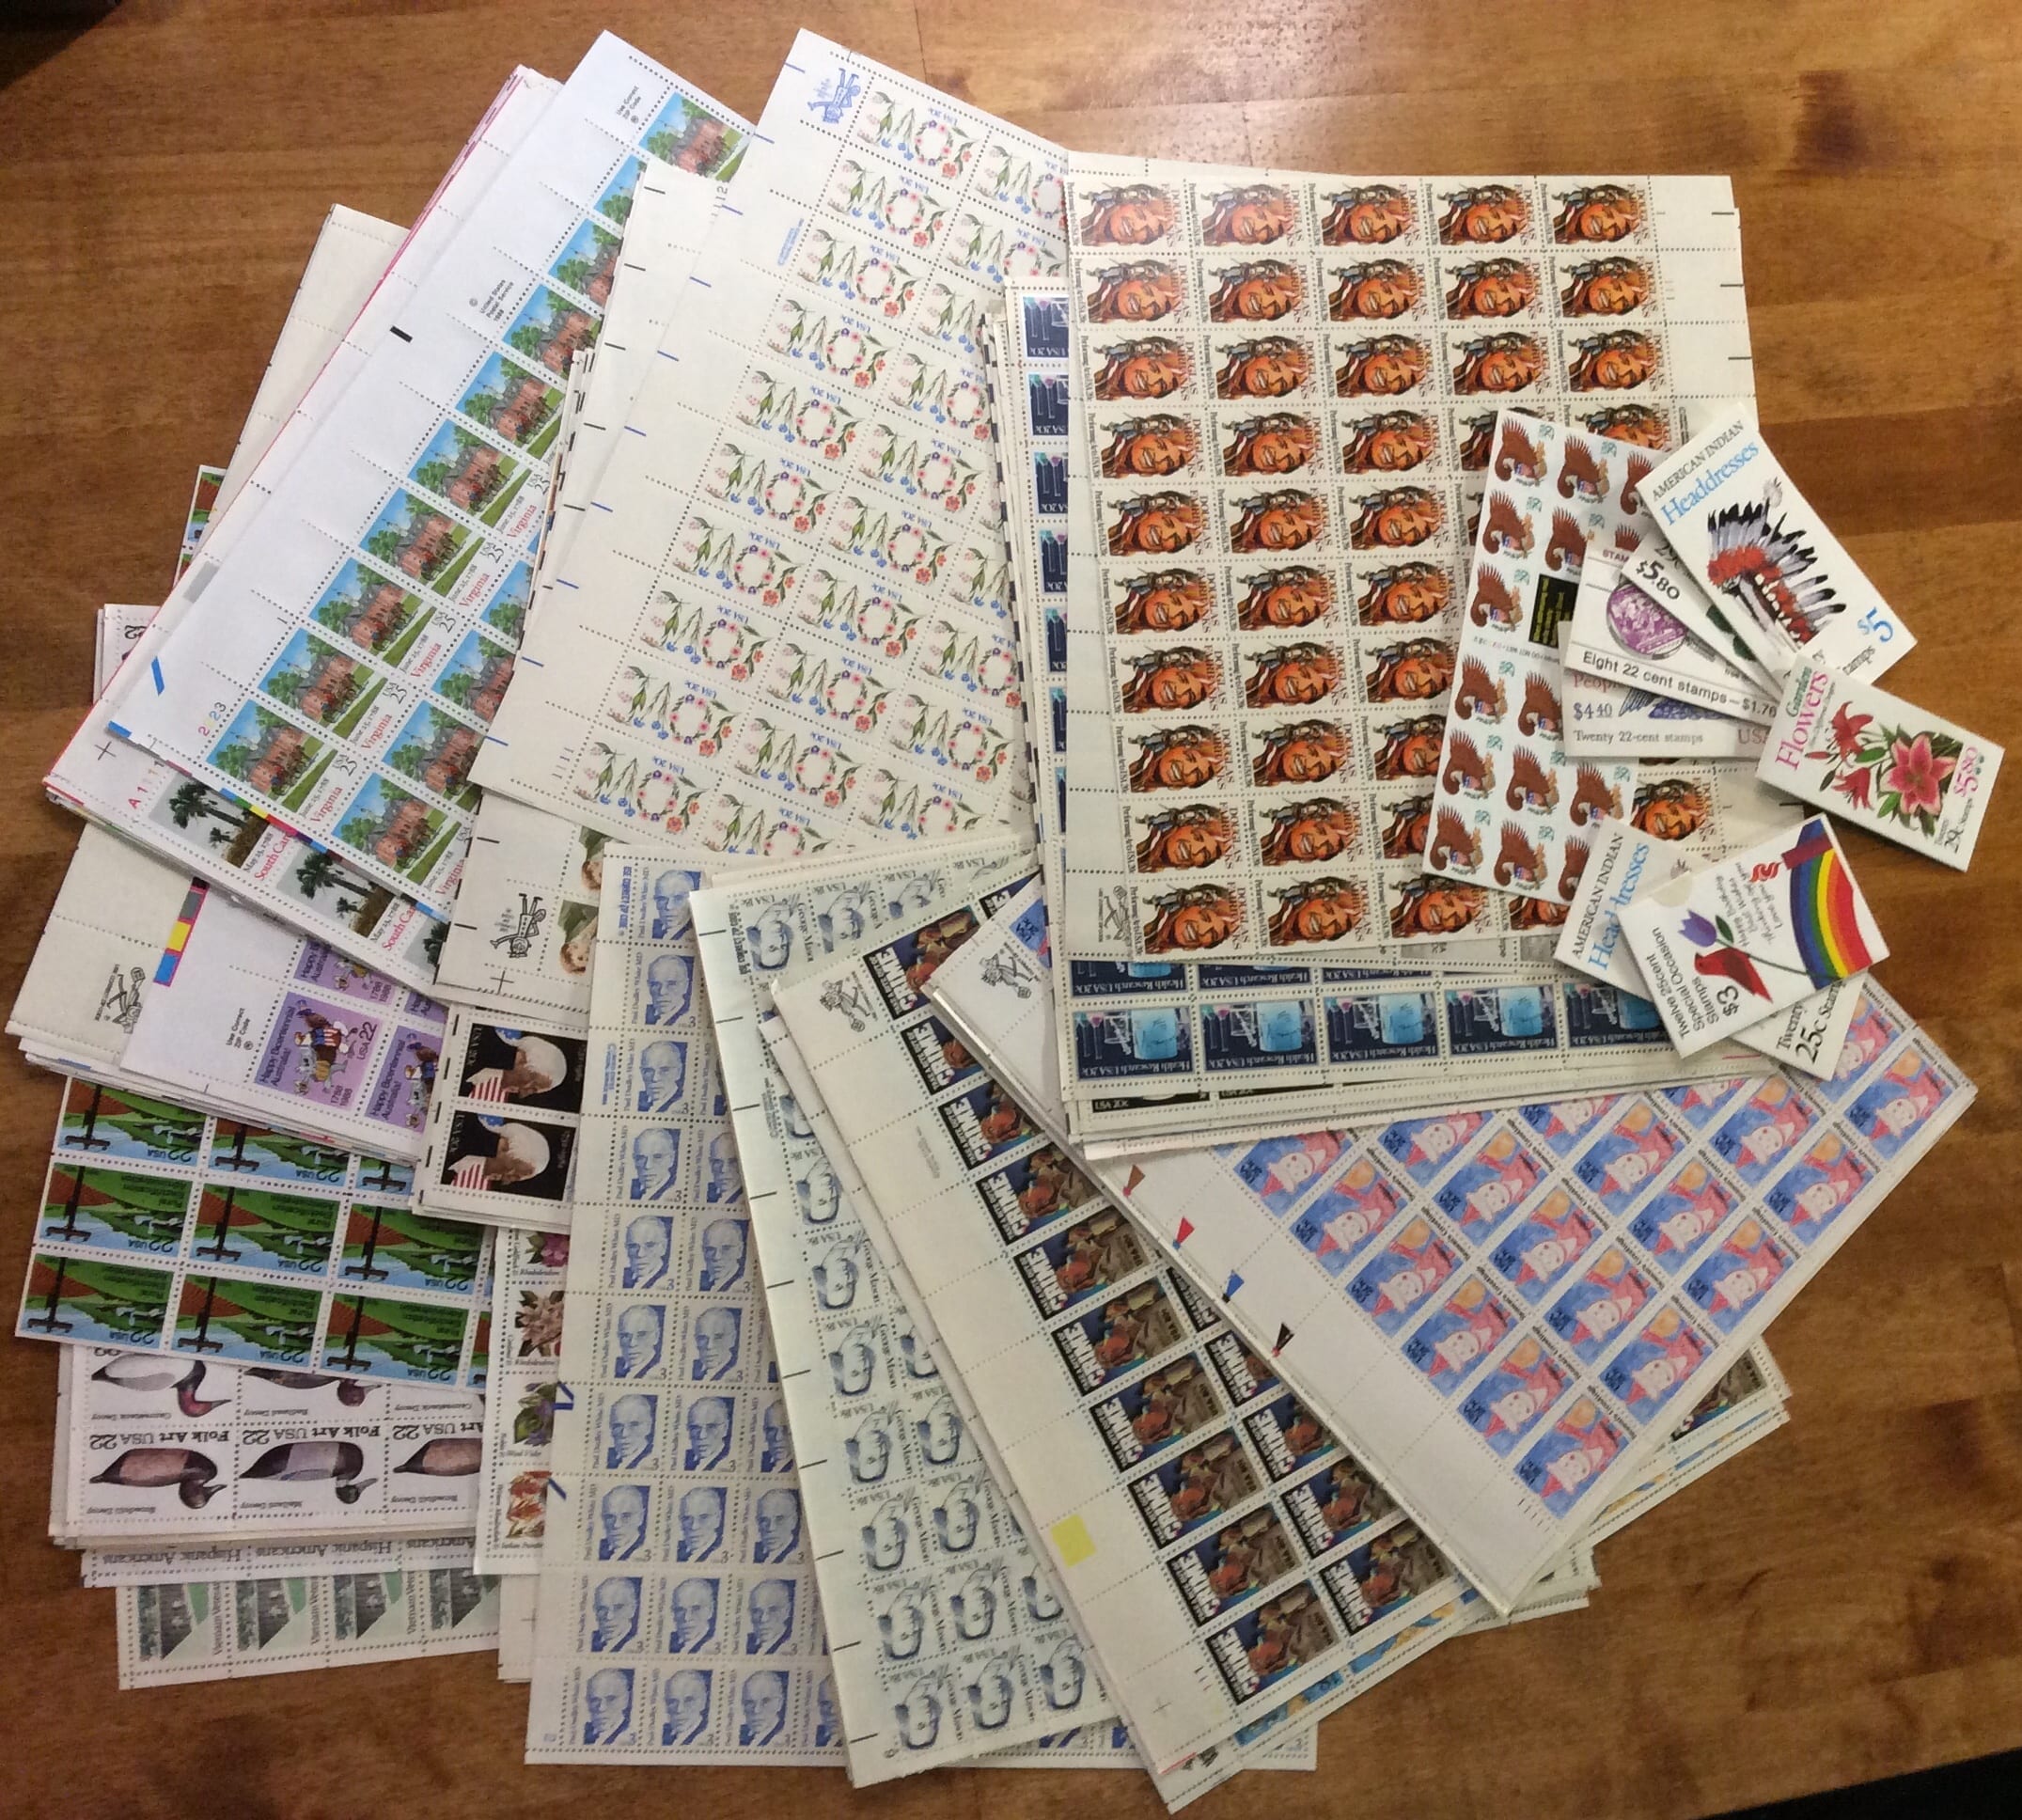 Under First-Class Stamps, Mixed Lot, New Condition ($1186.64 Face Value)